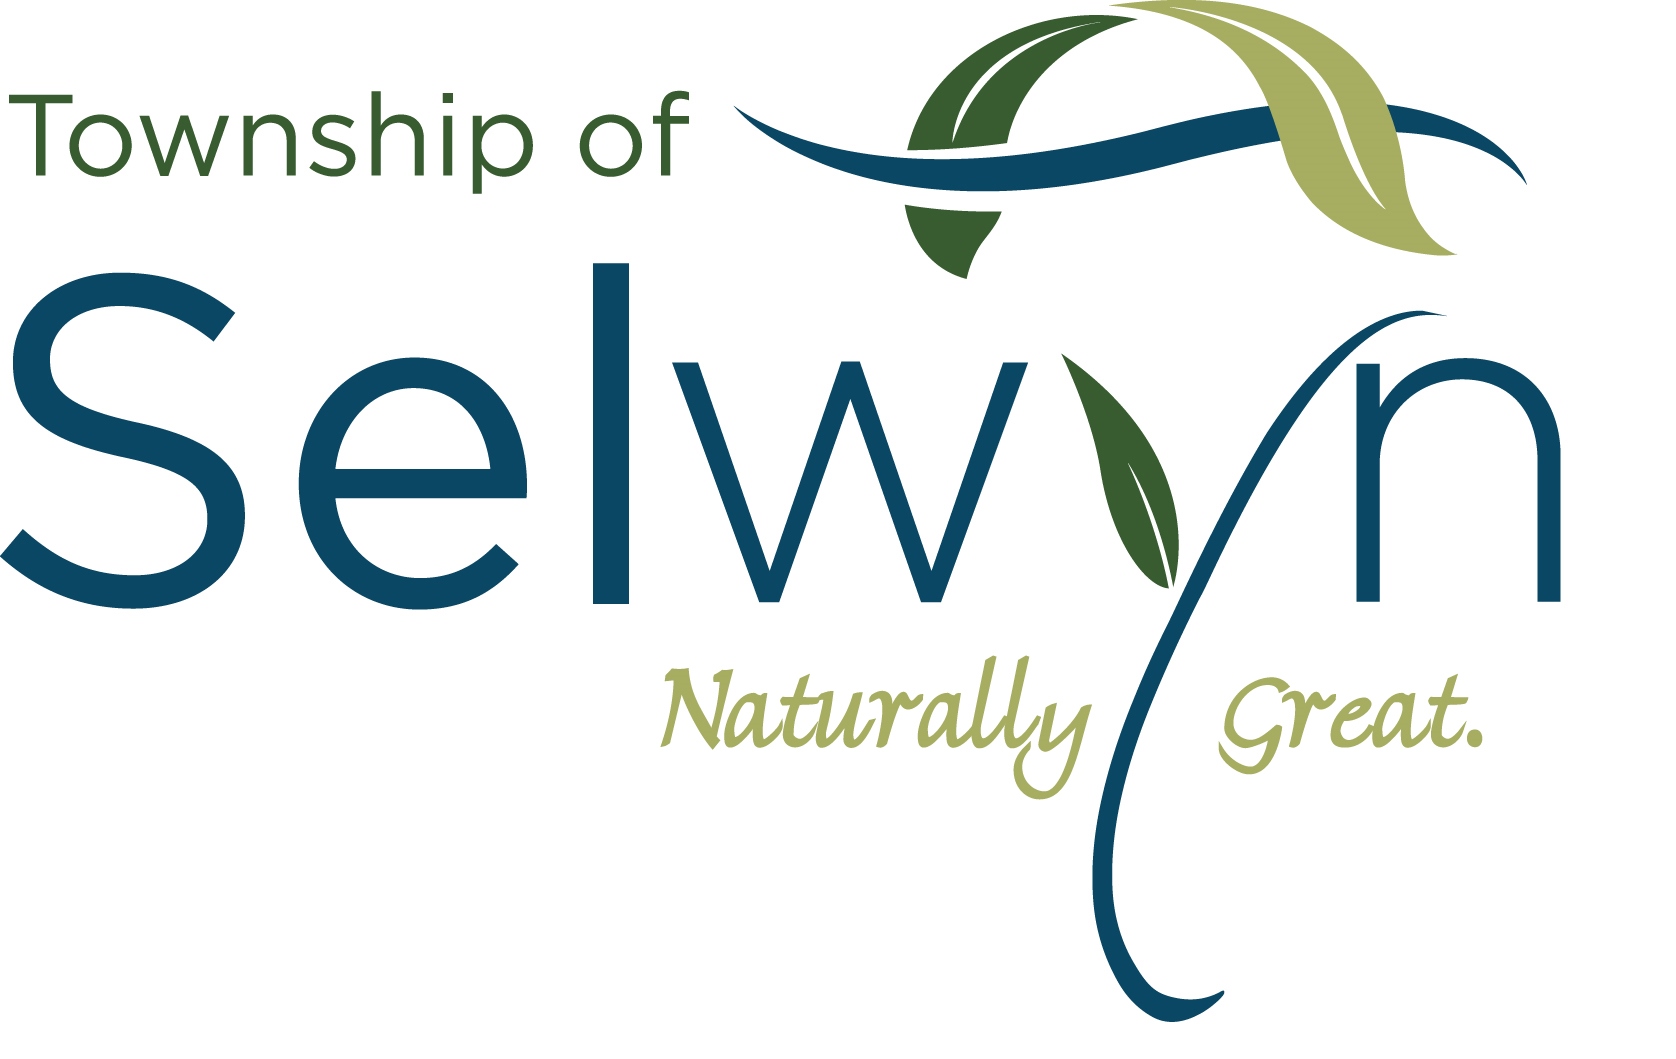 Selwyn Township Logo with Tagline "Naturally Great"